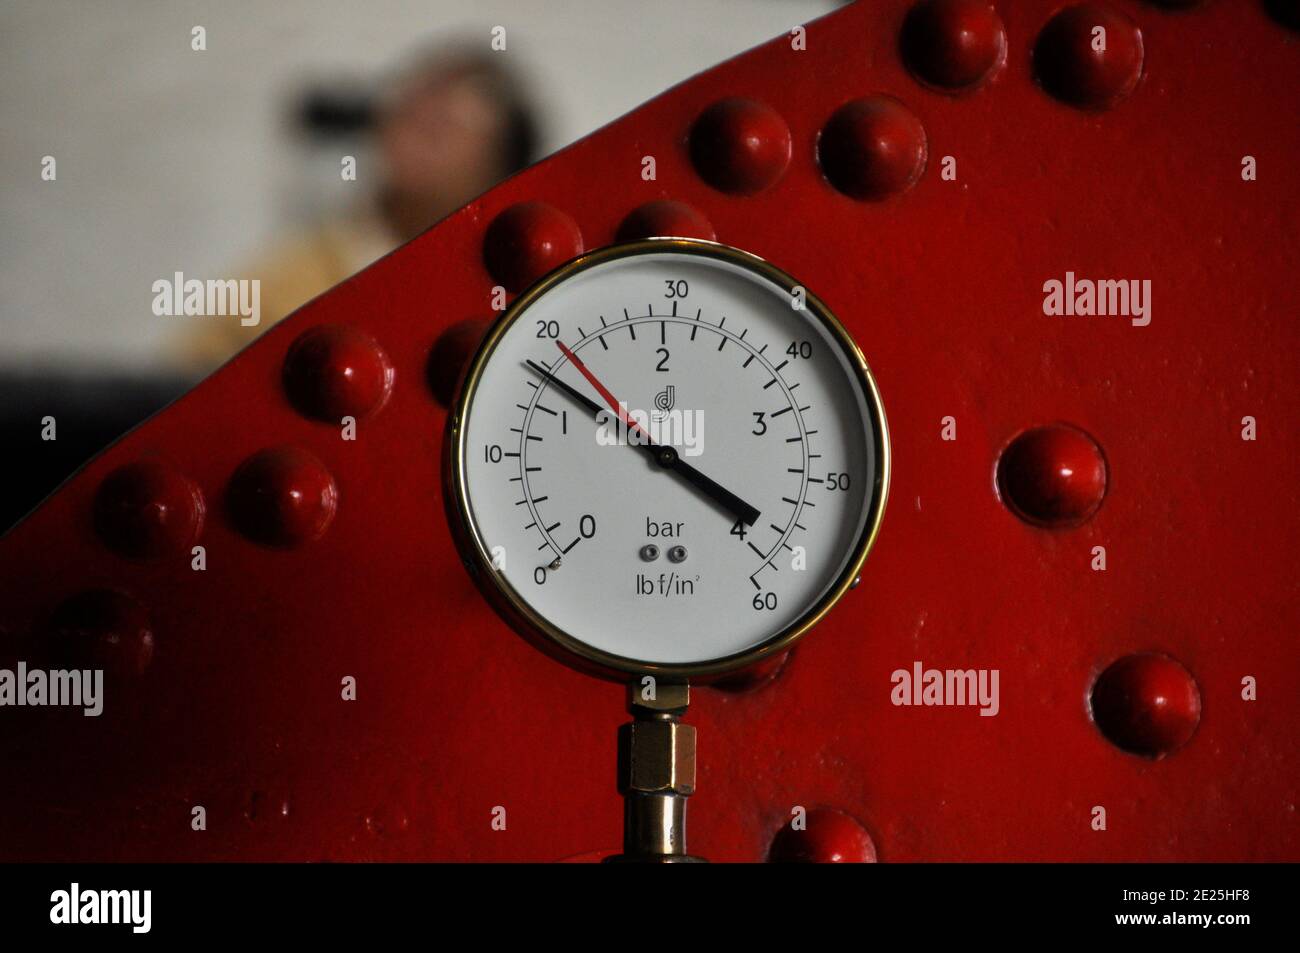 Pressure gauge on the boiler which provides the steam to operate the pumps at the Crofton Pumping Station on the highest point on the Kennet and Avon Stock Photo